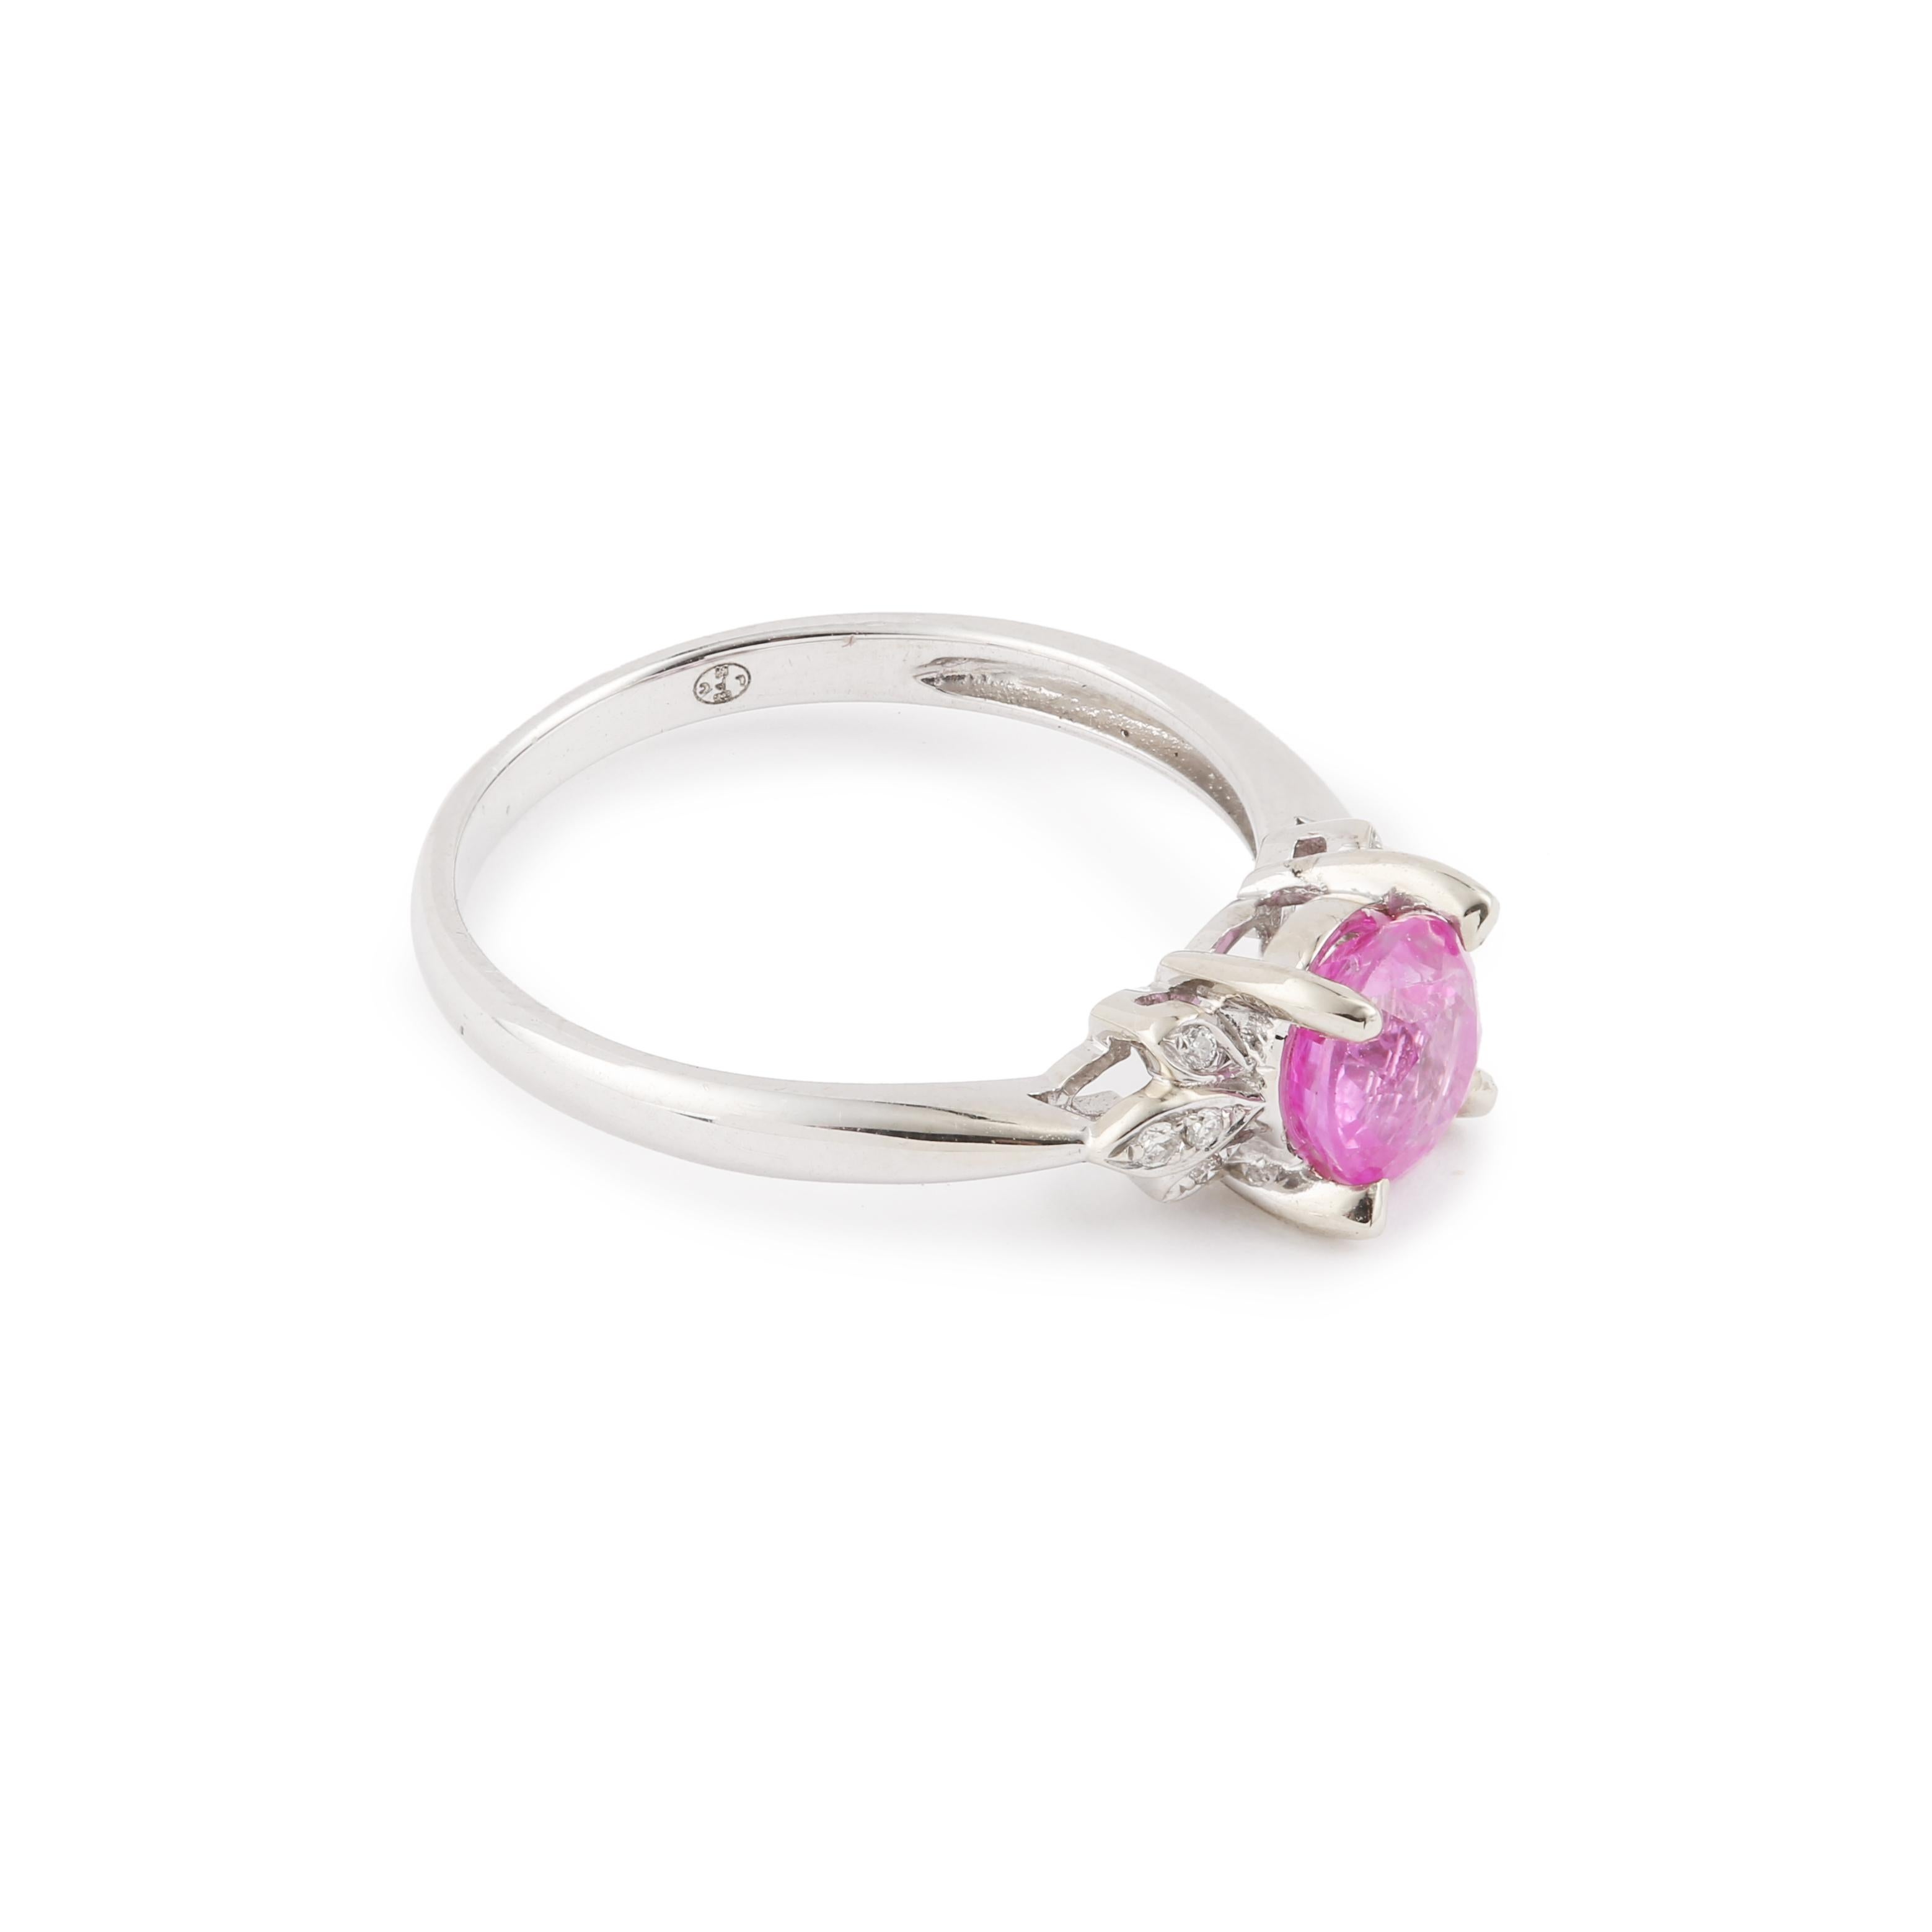 White gold ring set with a round-cut pink sapphire set with diamonds.

Weight of pink sapphire : 1.20 carats

Total weight of diamonds: 0.04 carats

Dimensions : 6.38 x 12.67 x 5.84 mm (0.251 x 0.498 x 0.230 inch)

Finger size : 53 (US : 6